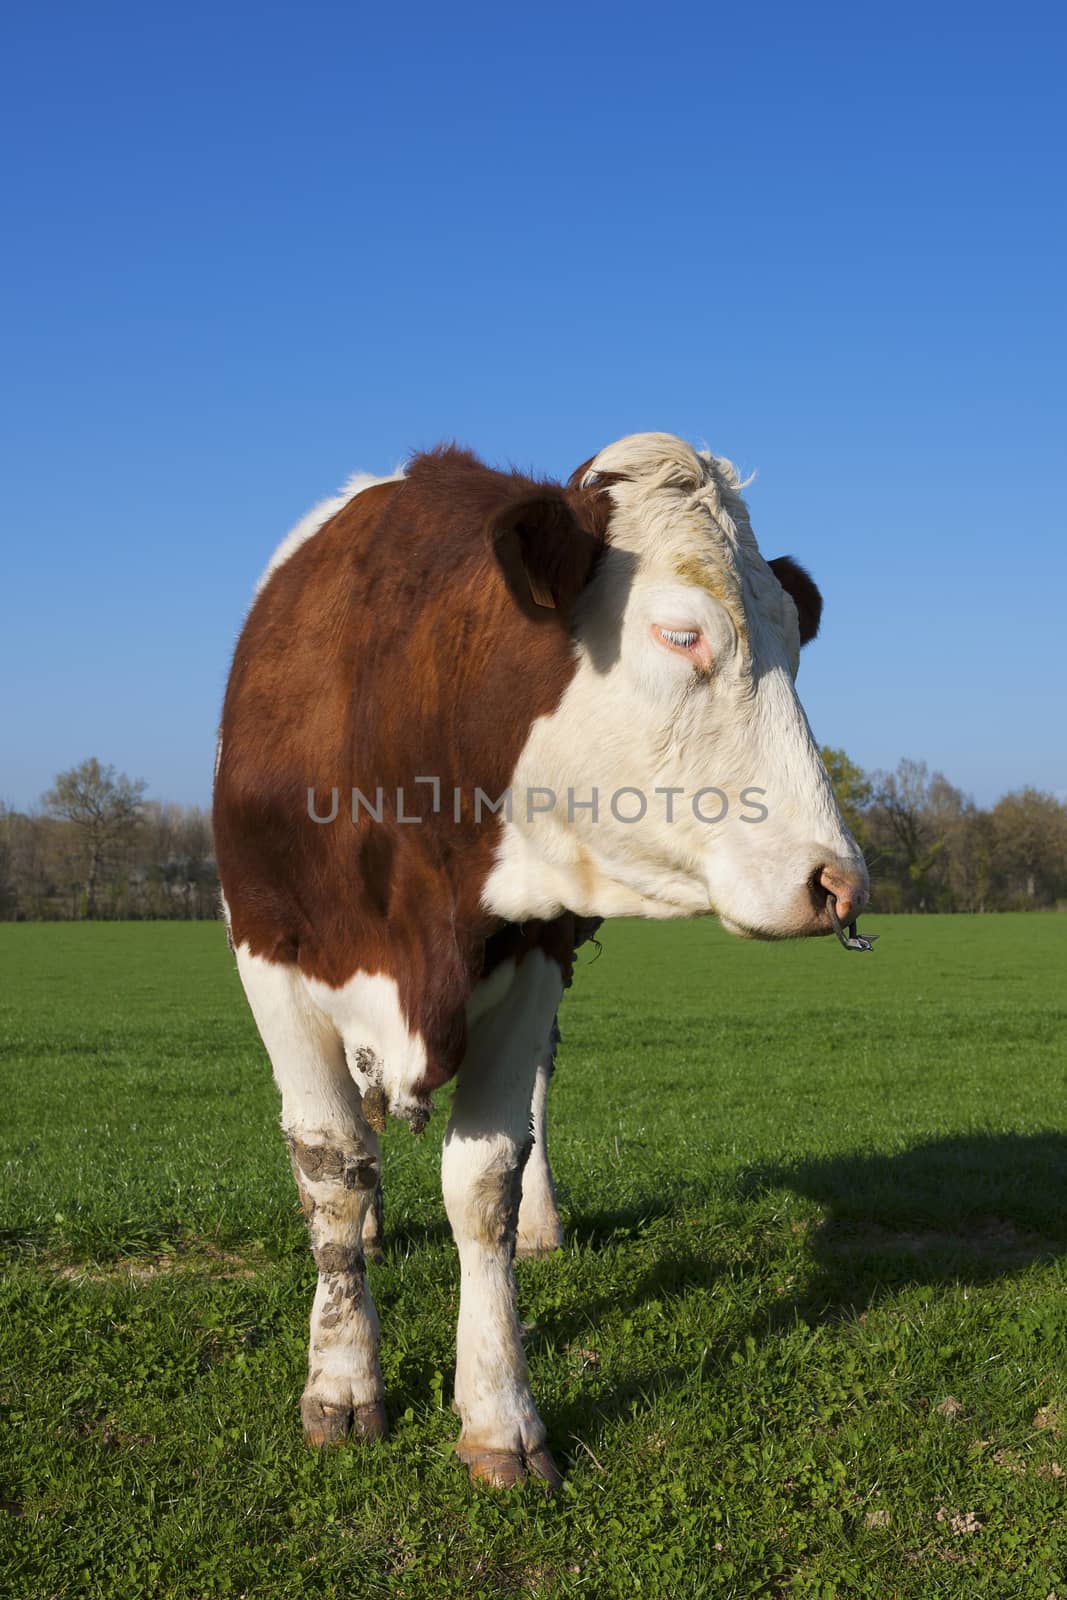 White and brown cow on green grass under the sun